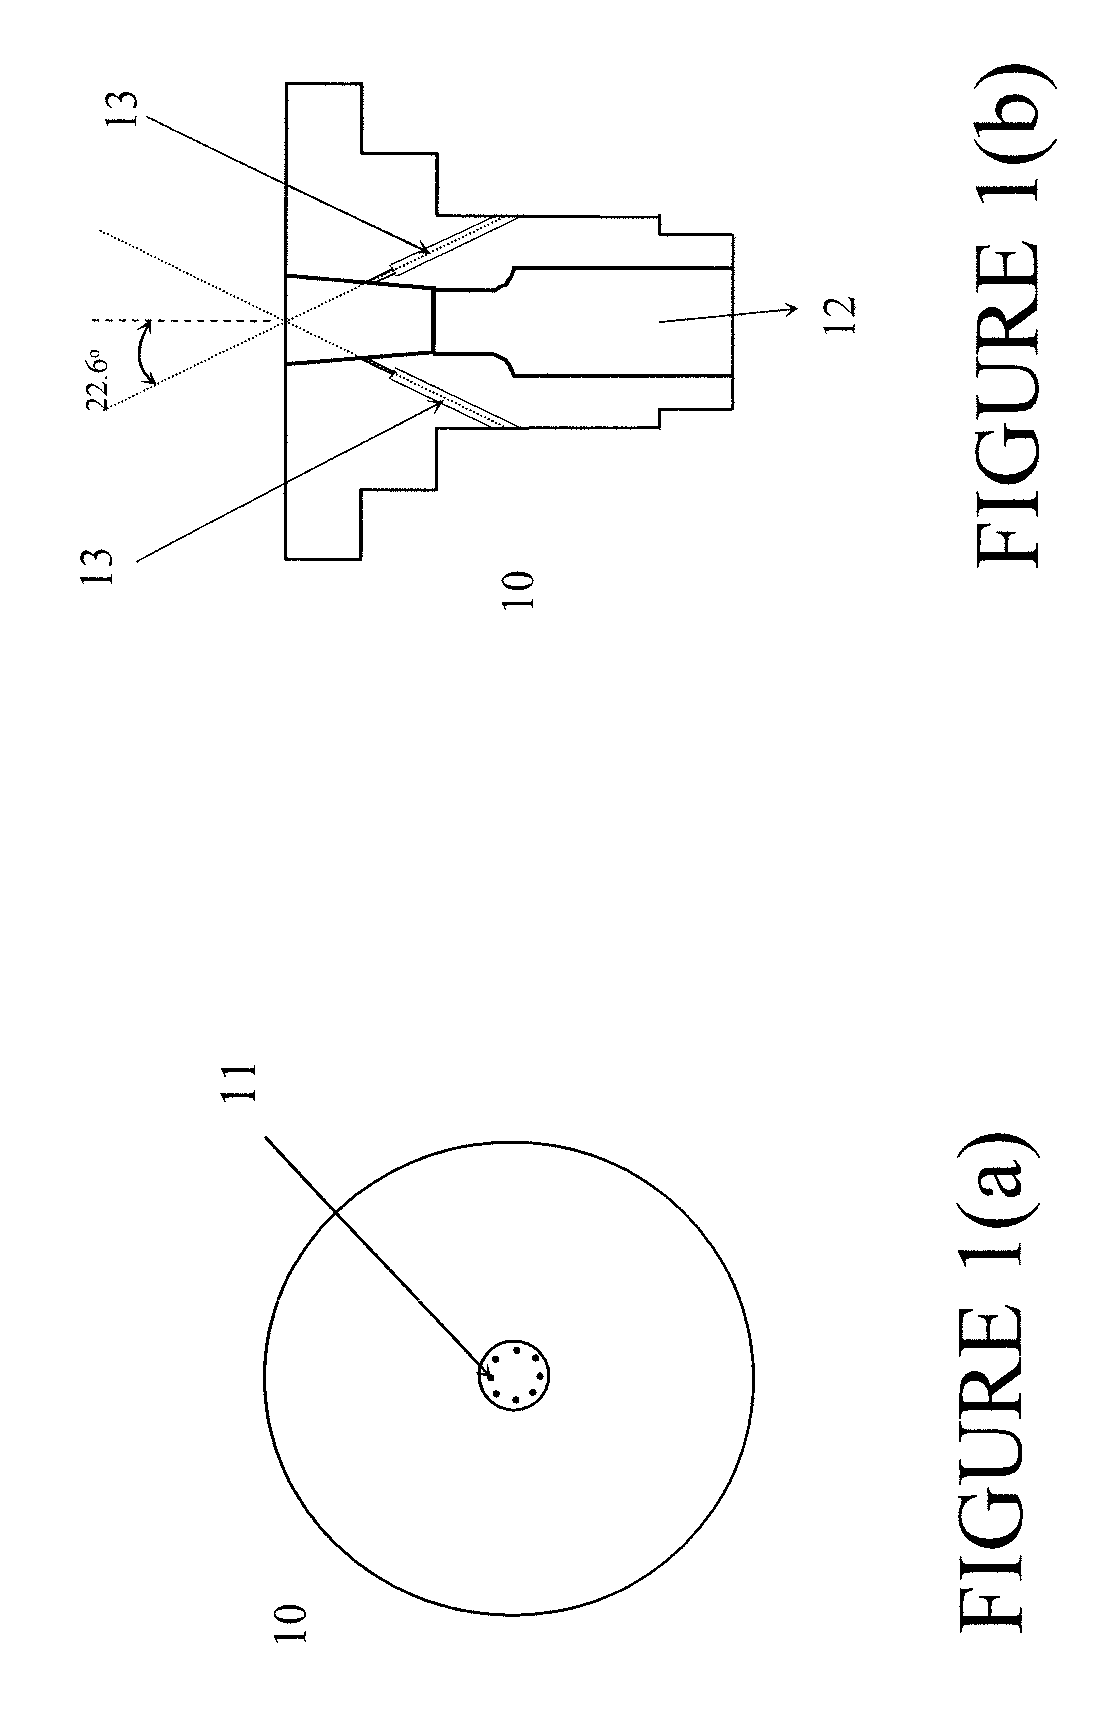 Injection method for inert gas